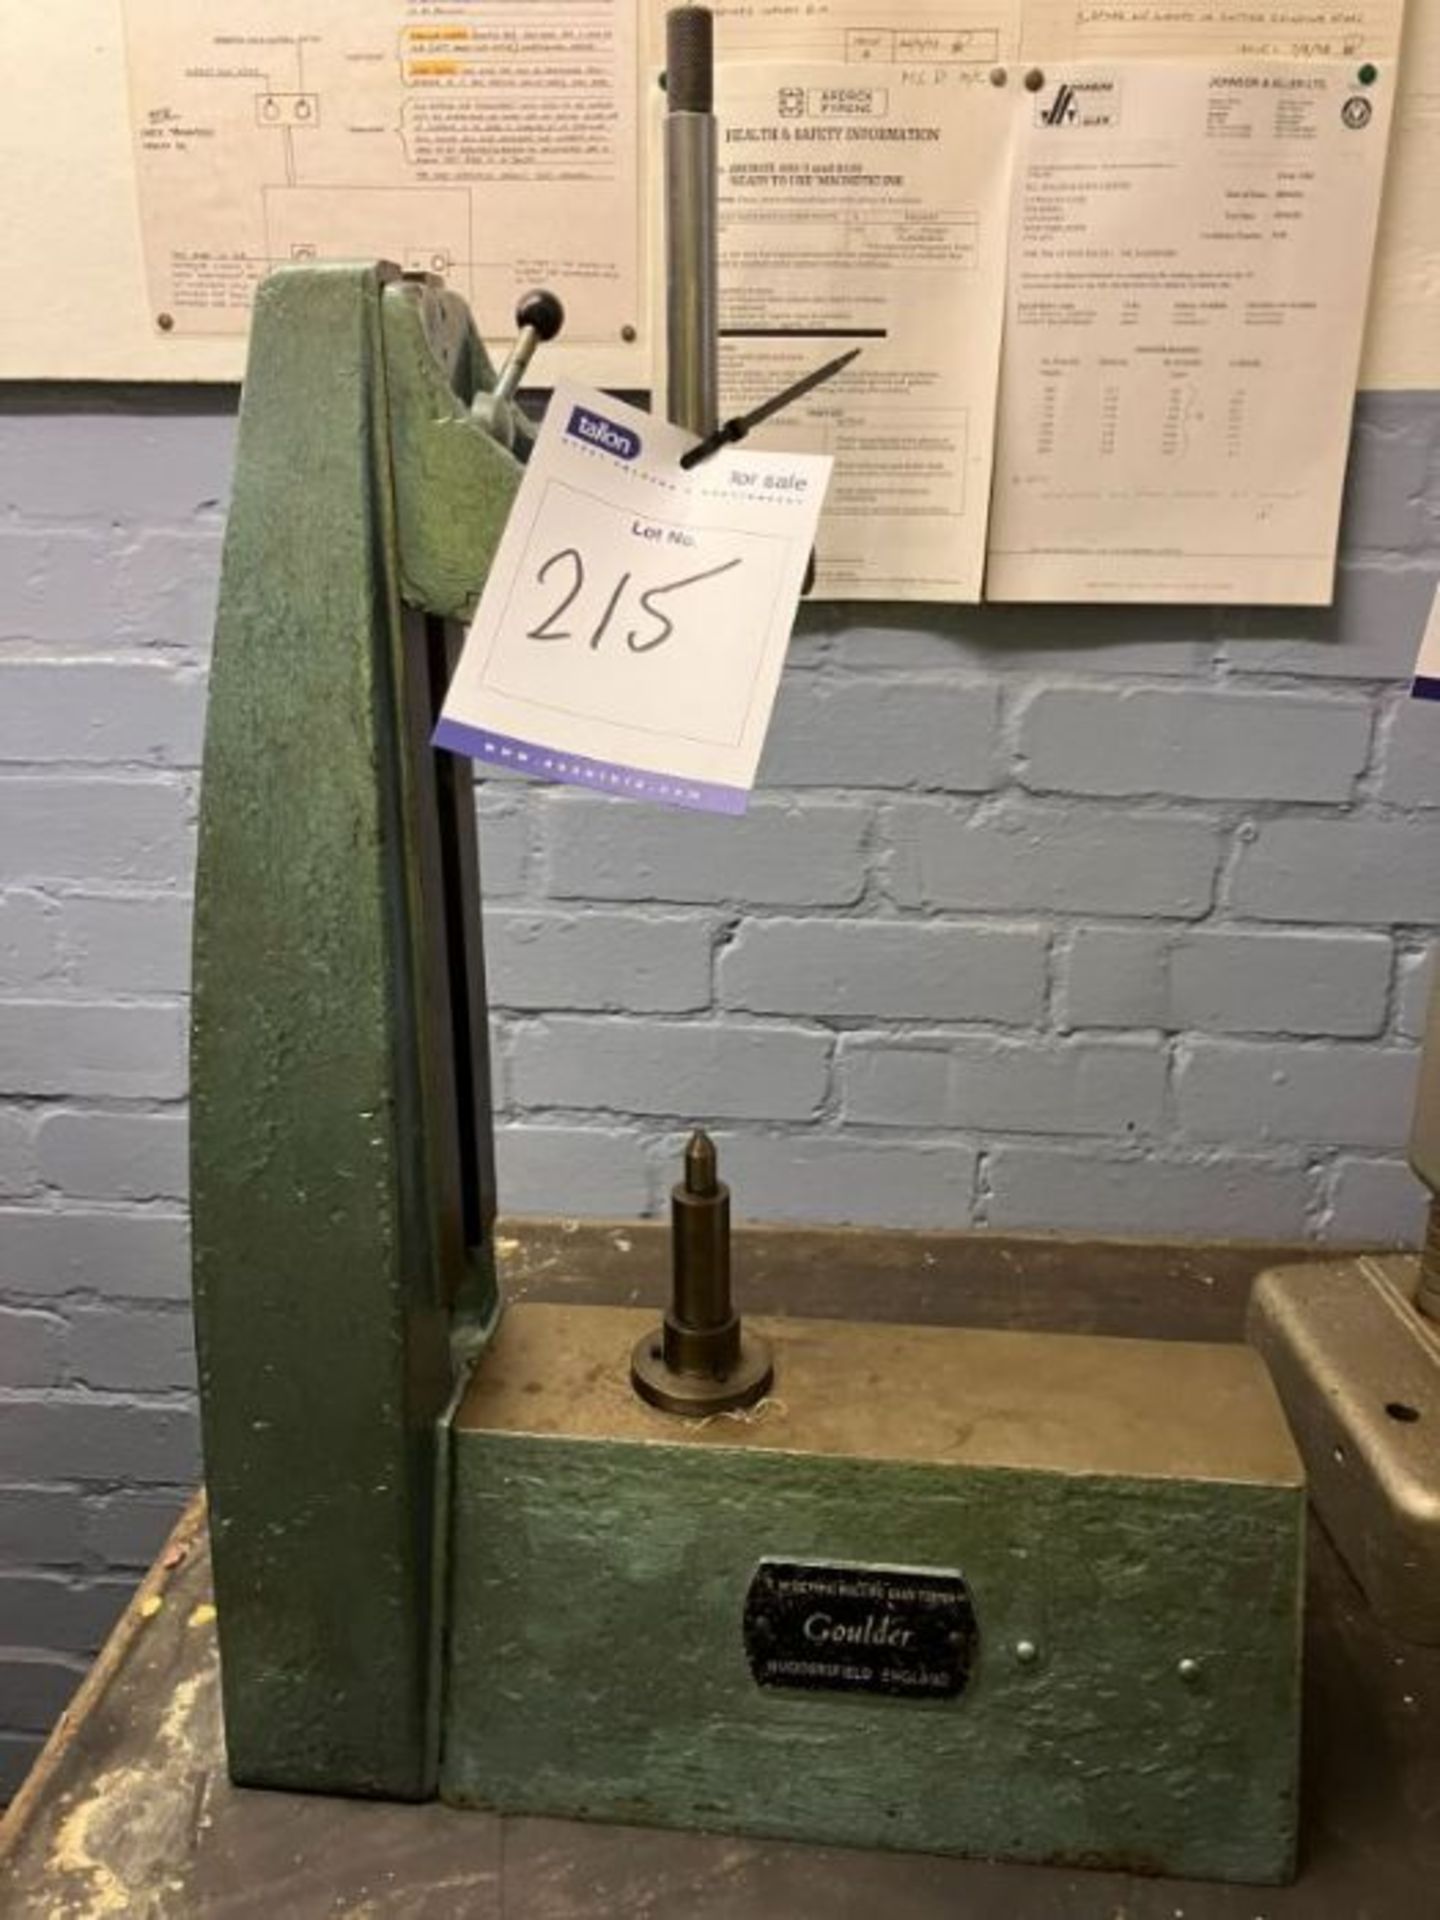 Goulder S type rolling gear tester